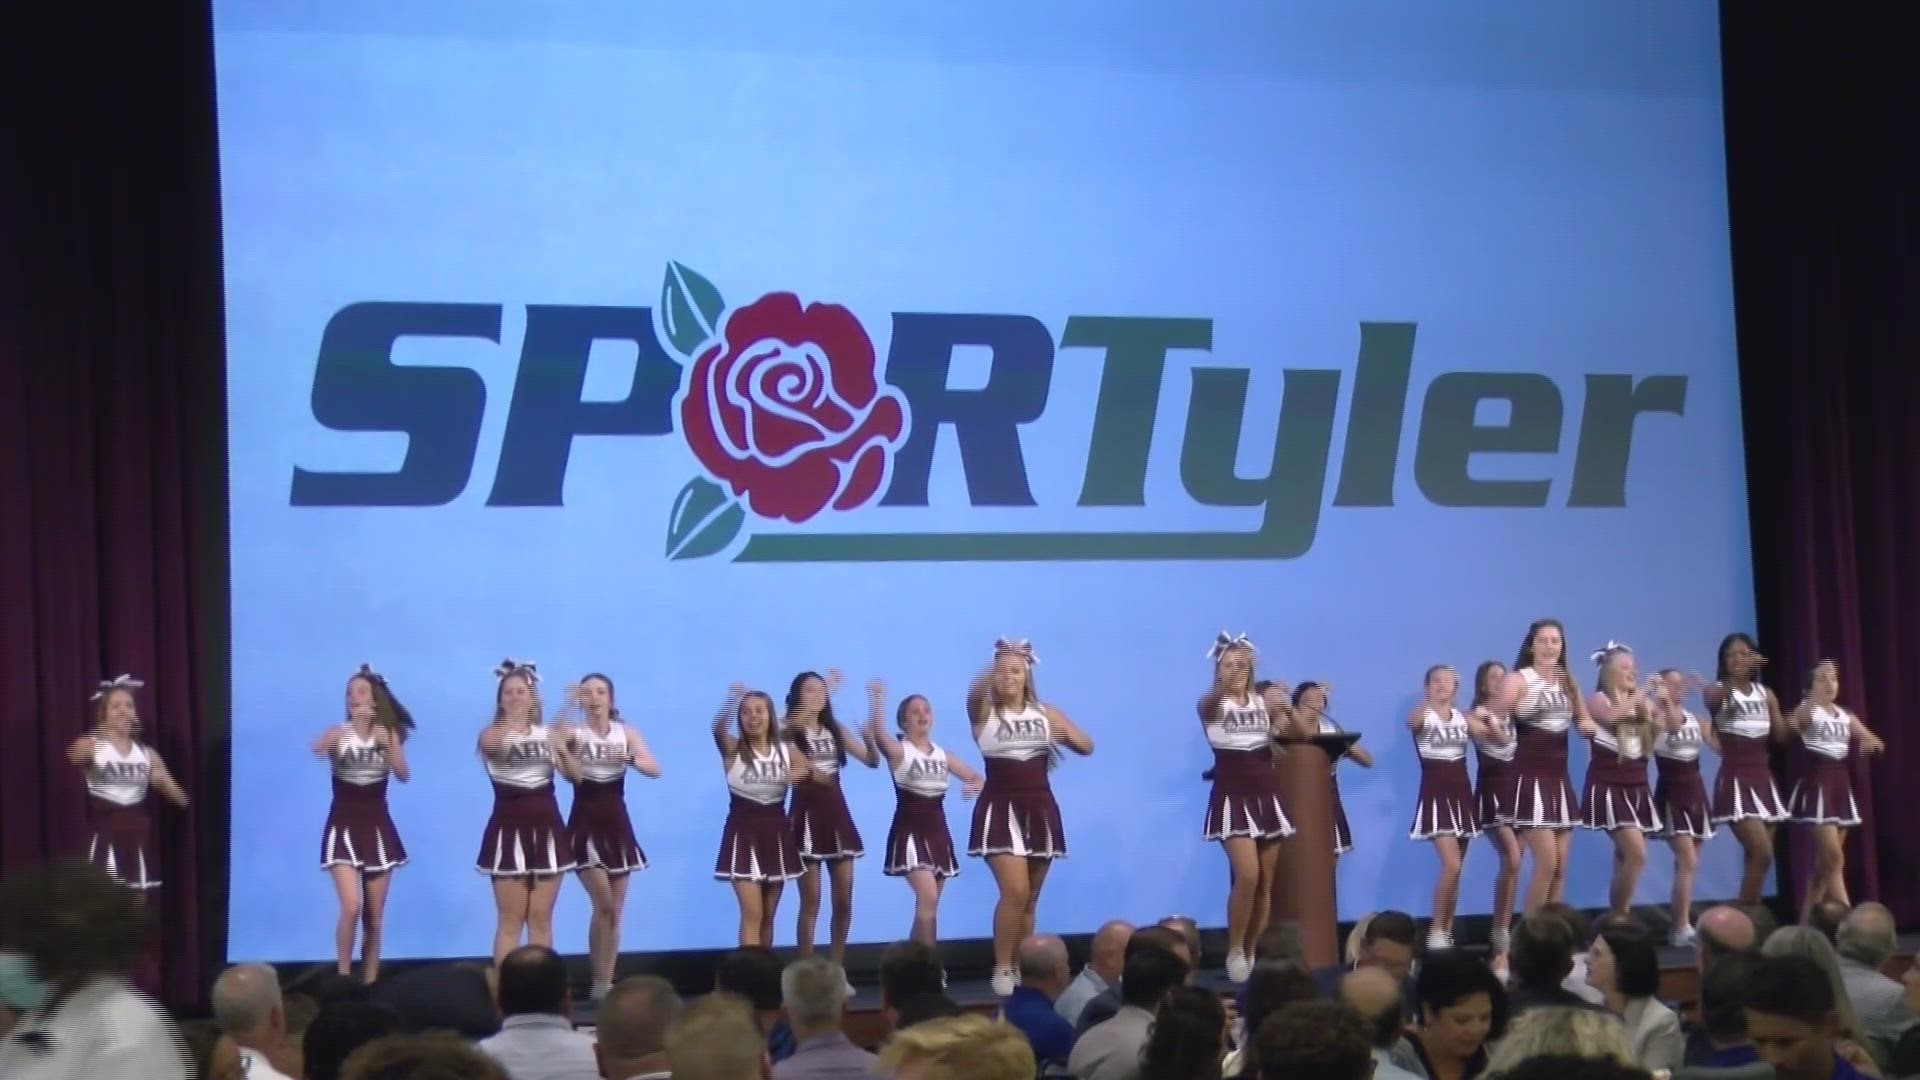 Over 40 teams were represented as SPORTyler kicked off the 2022 season in style with a high-profile keynote speaker.